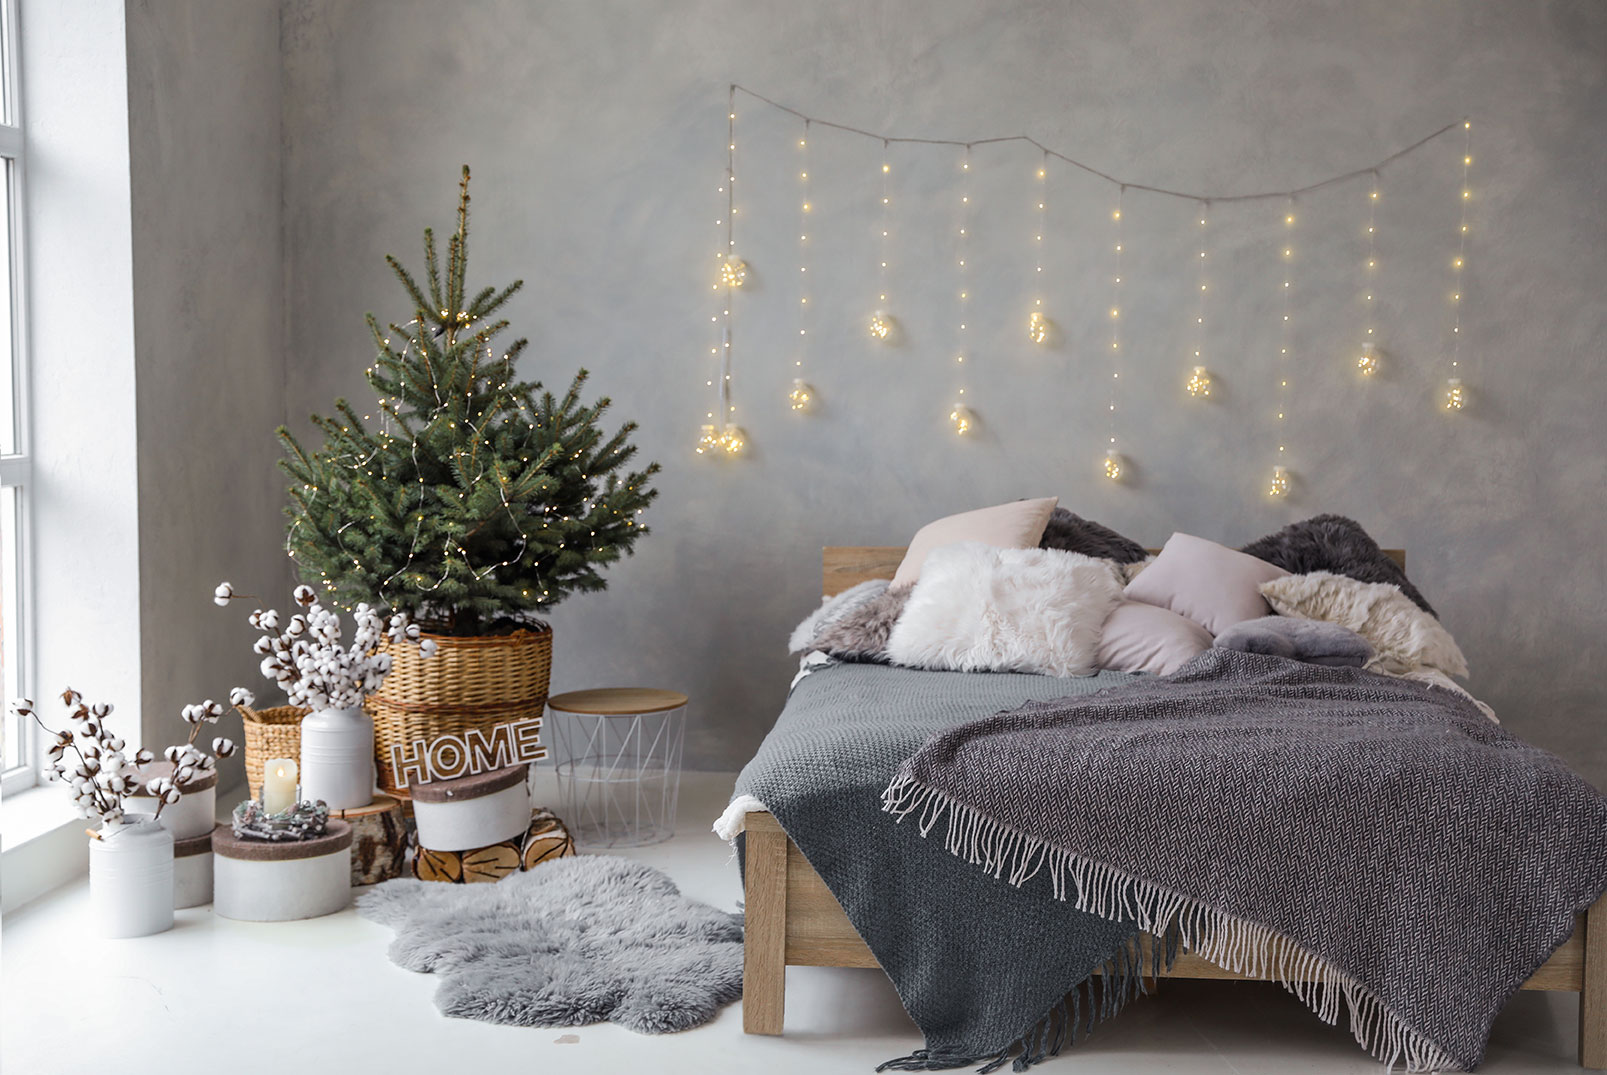 Preparing your guest room for Christmas